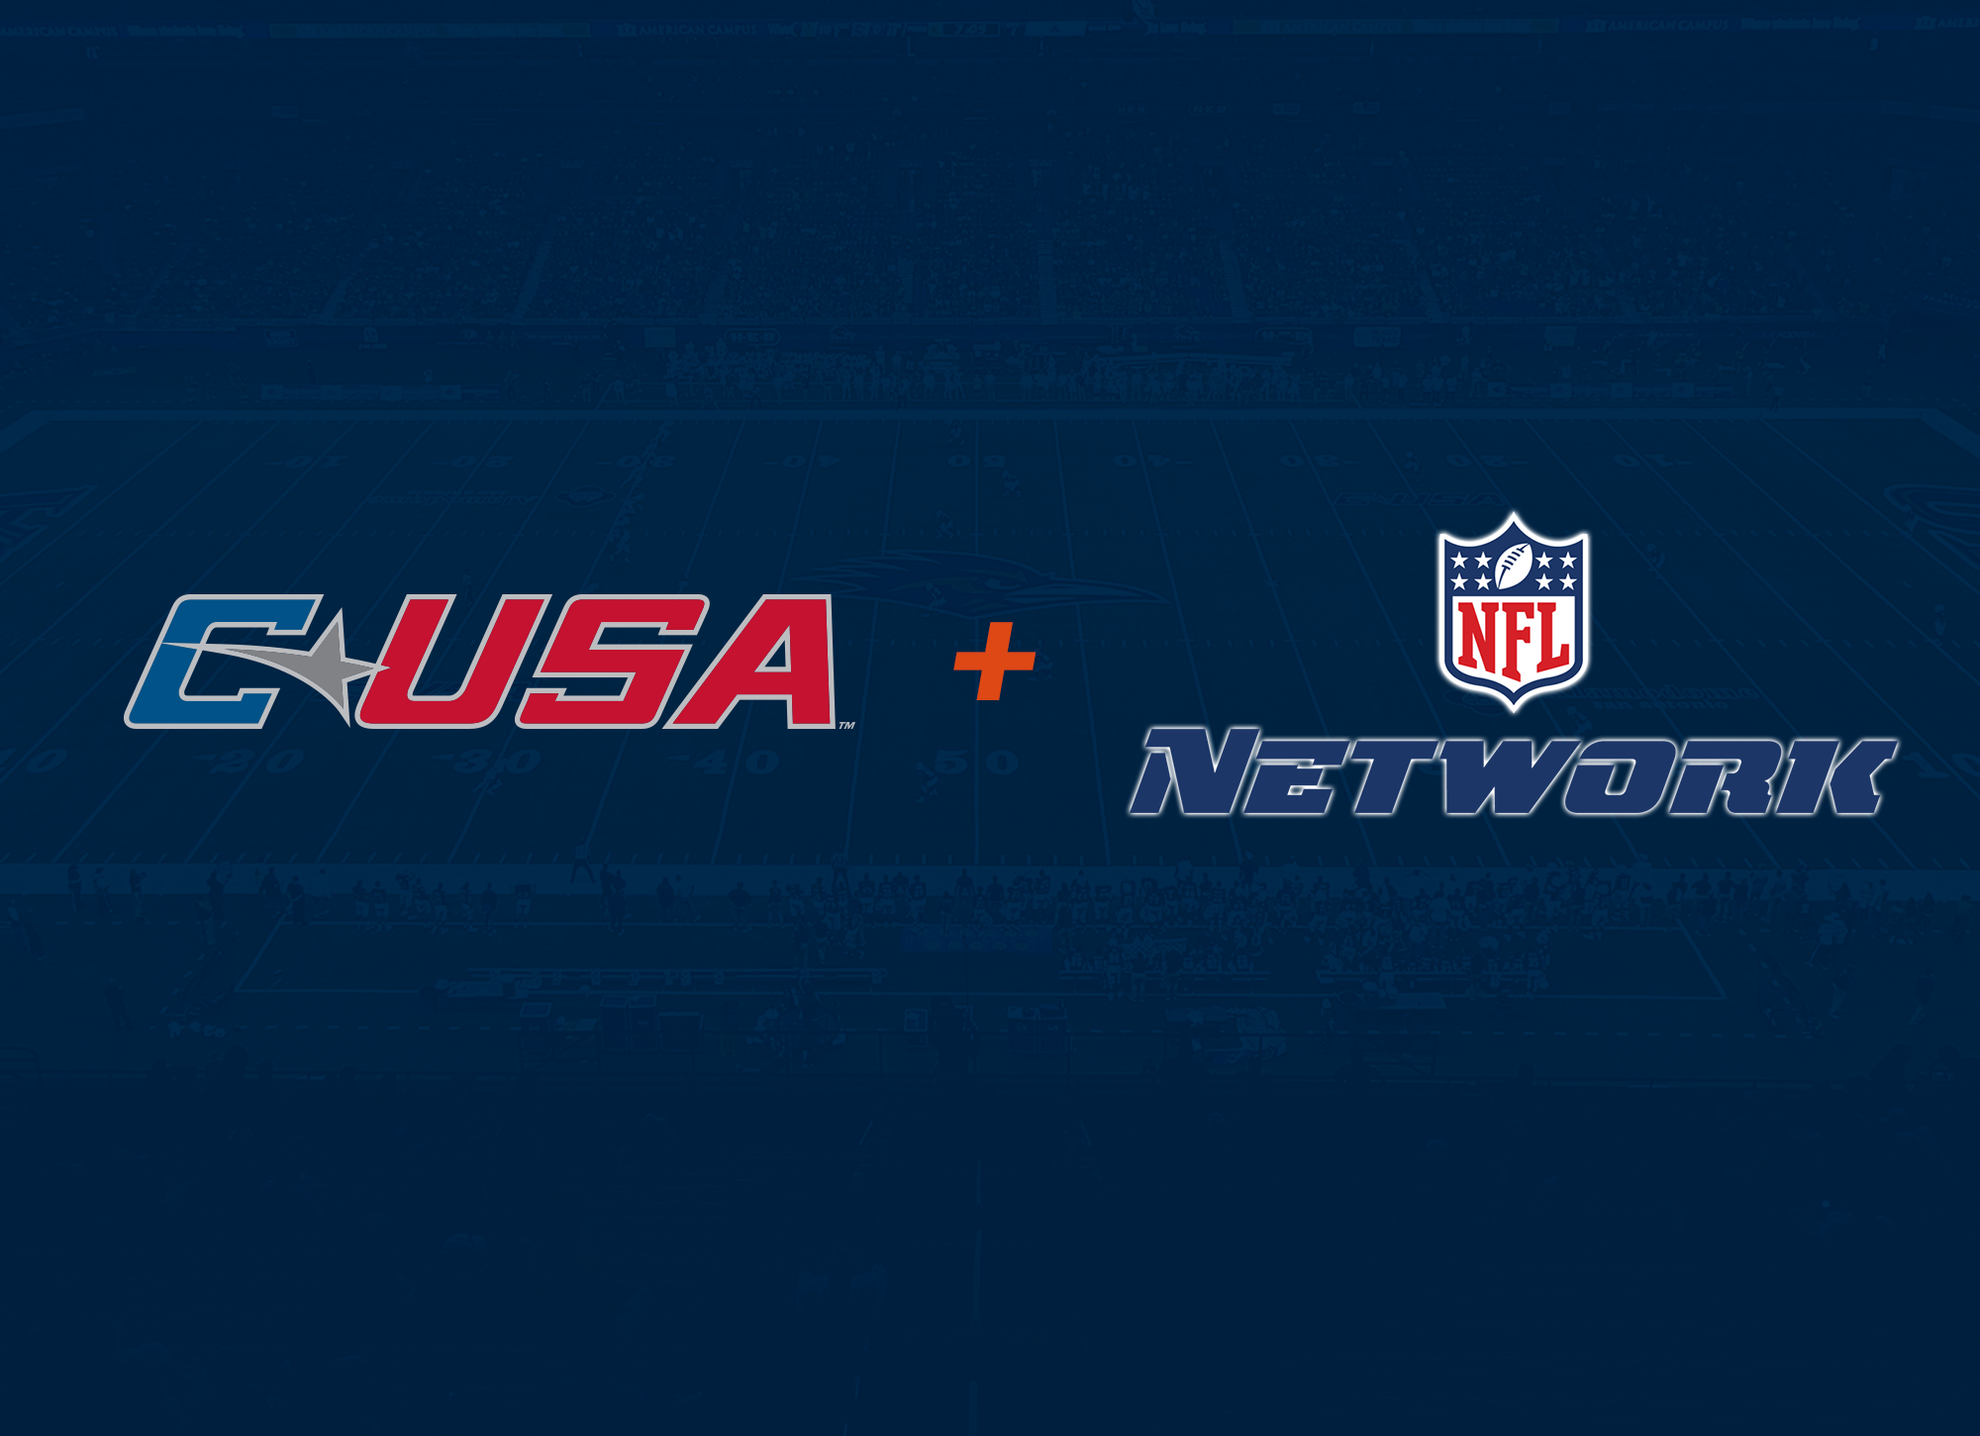 C-USA partners with NFL Network for 10 conference football games - UTSA Athletics